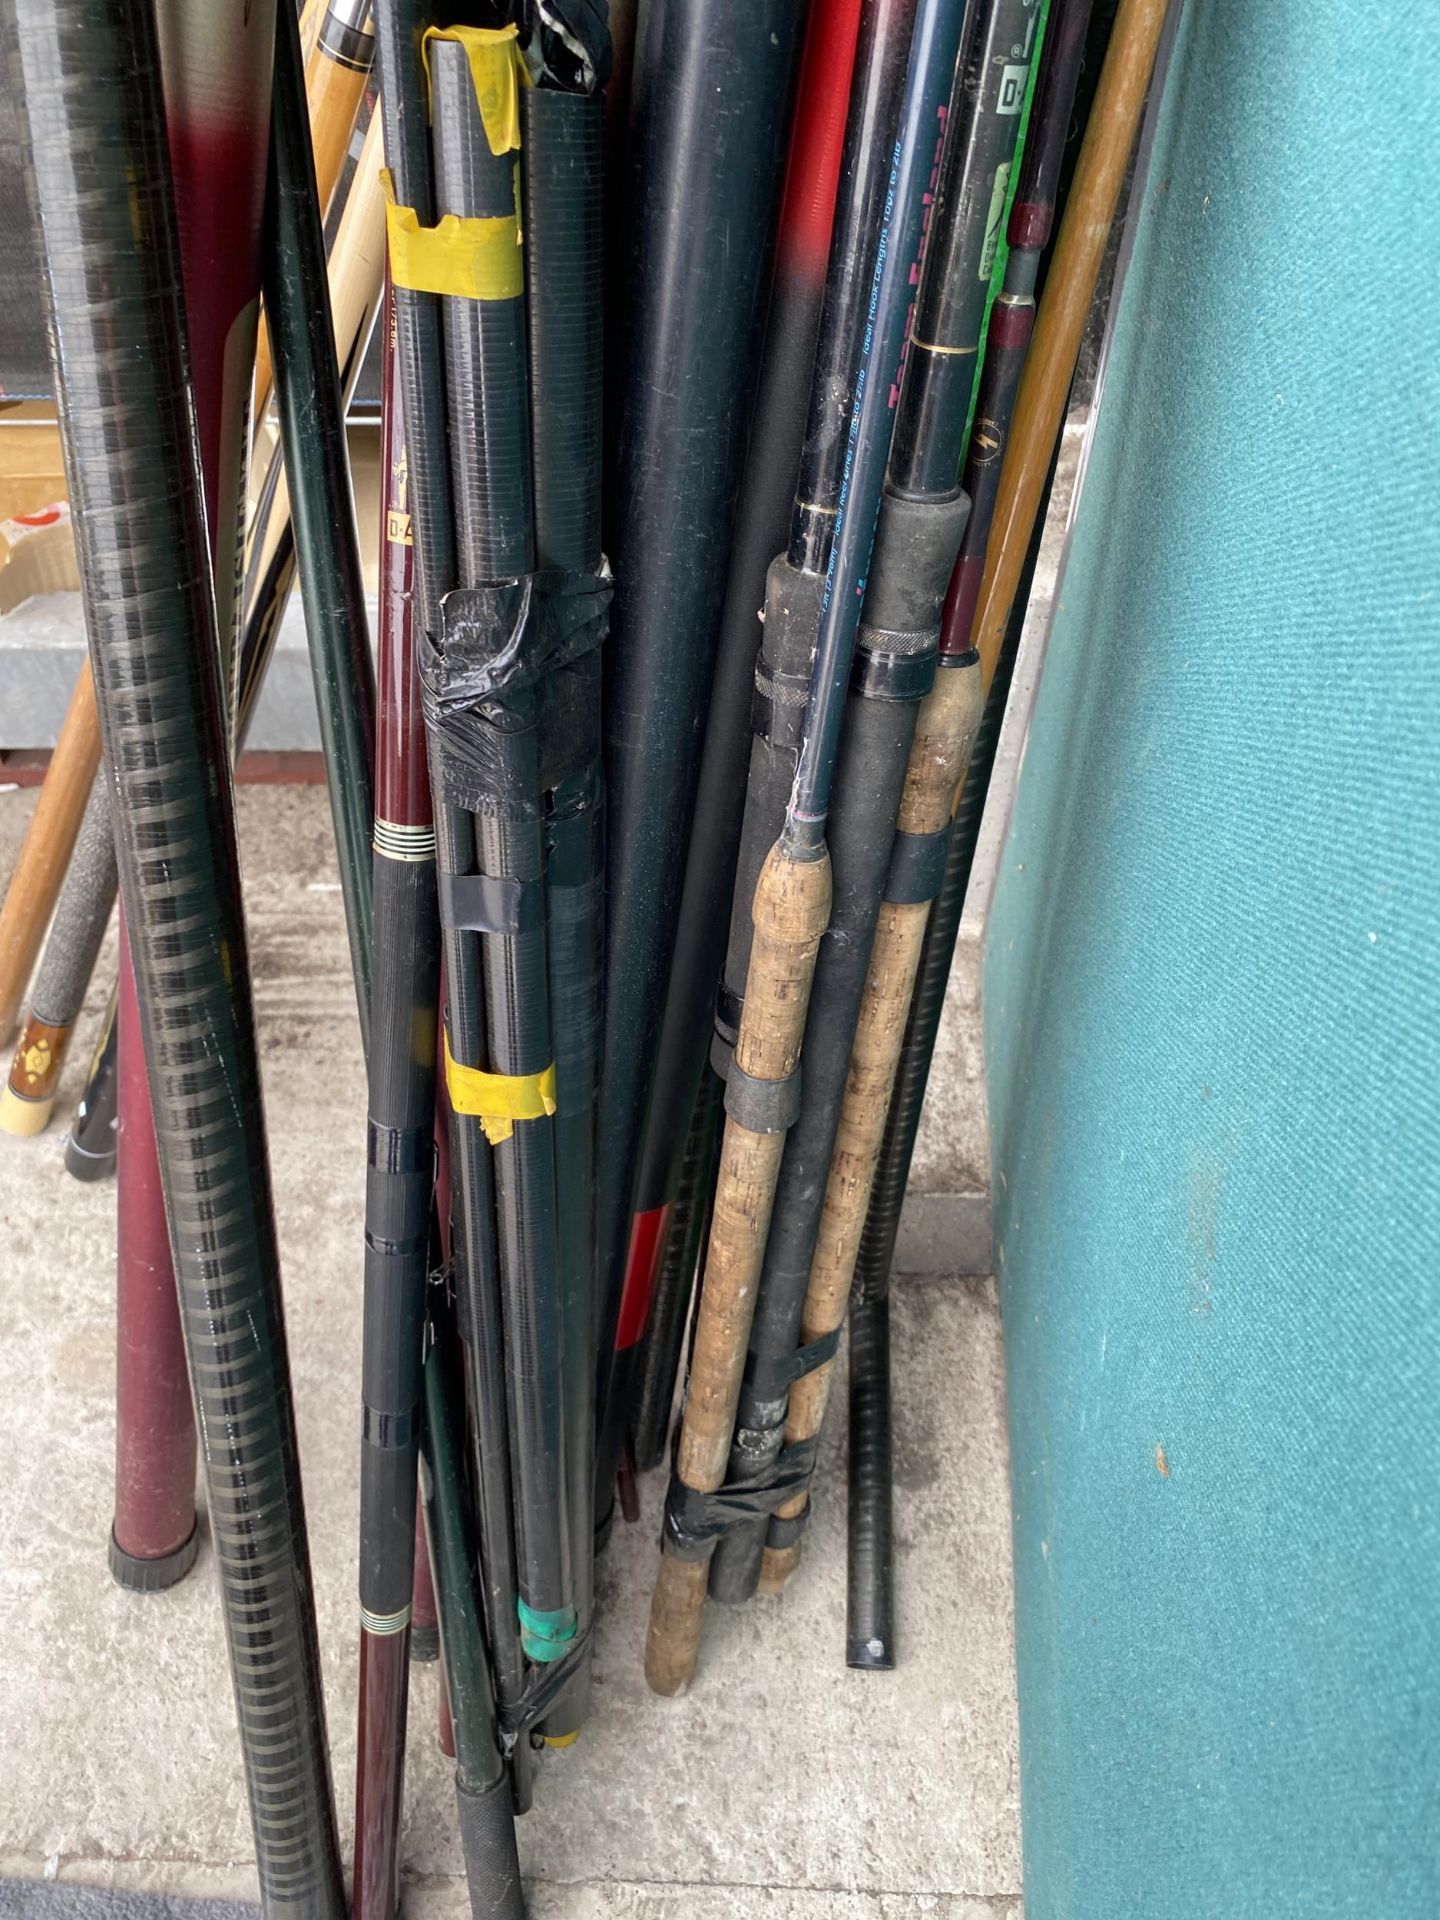 A KLARGE ASSORTMENT OF VARIOUS FISHING RODS - Image 4 of 4